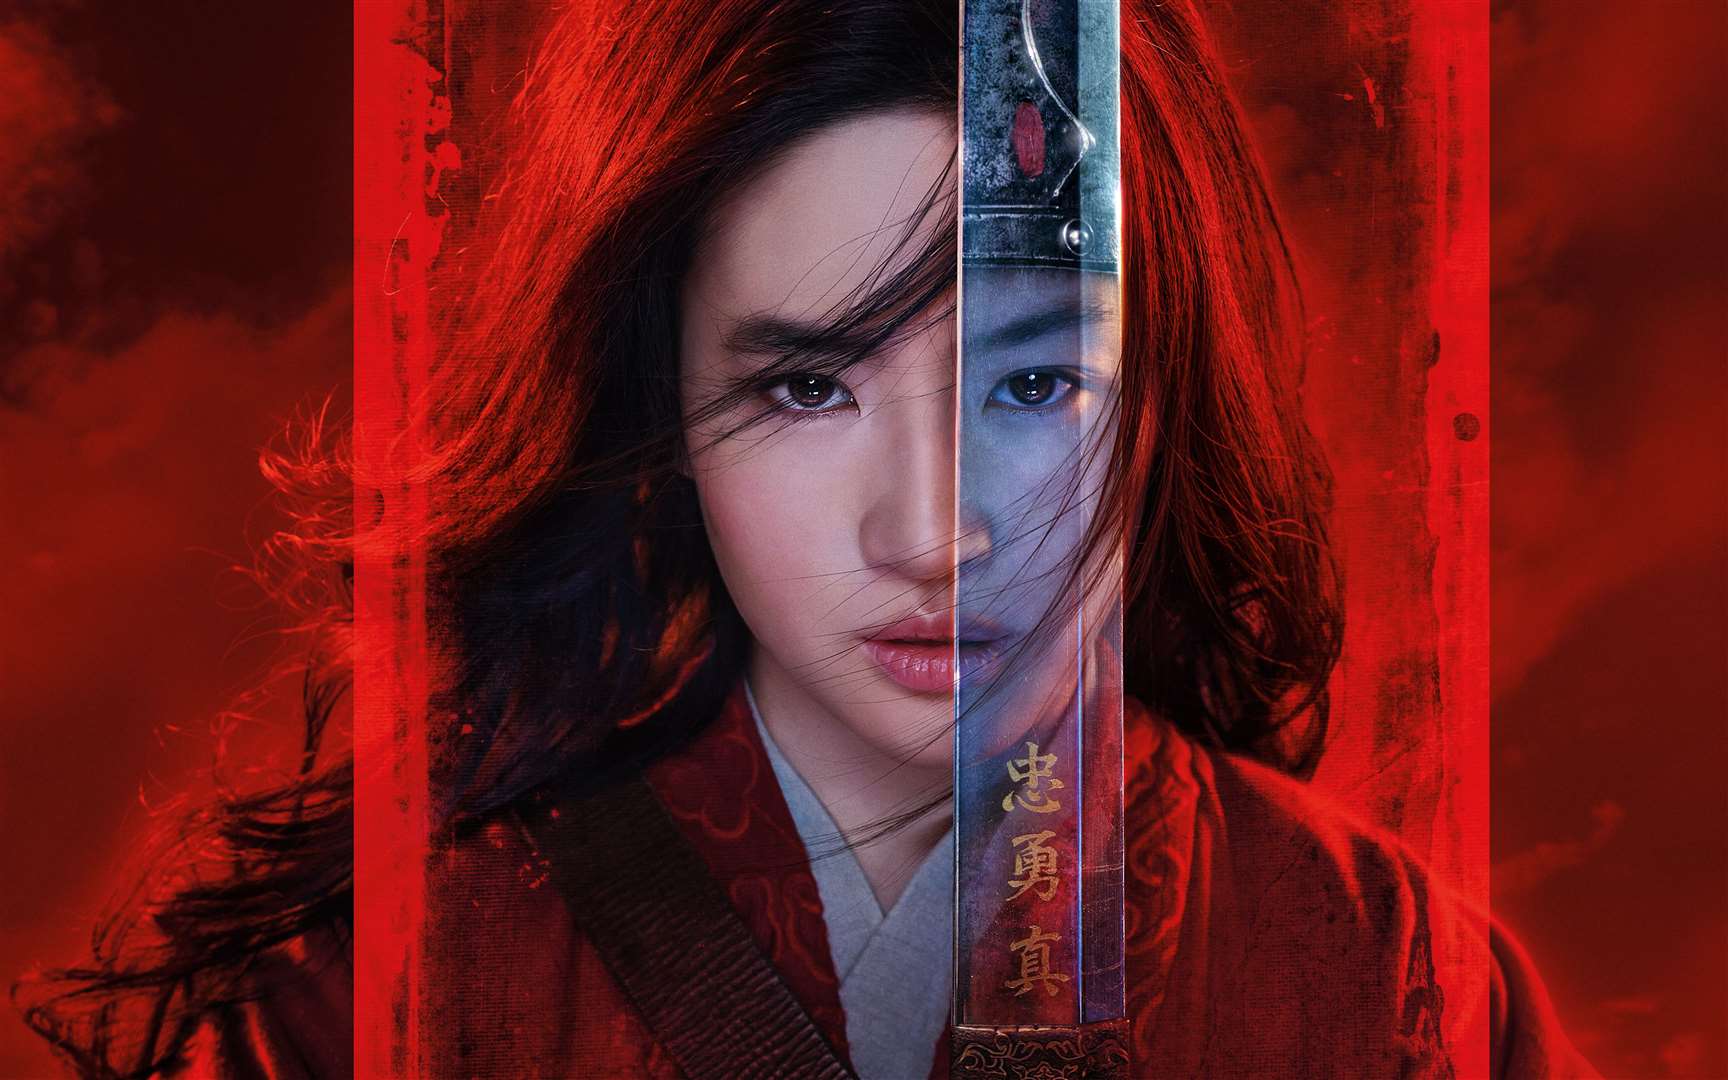 Mulan's release had to be rescheduled and is now set for July 24